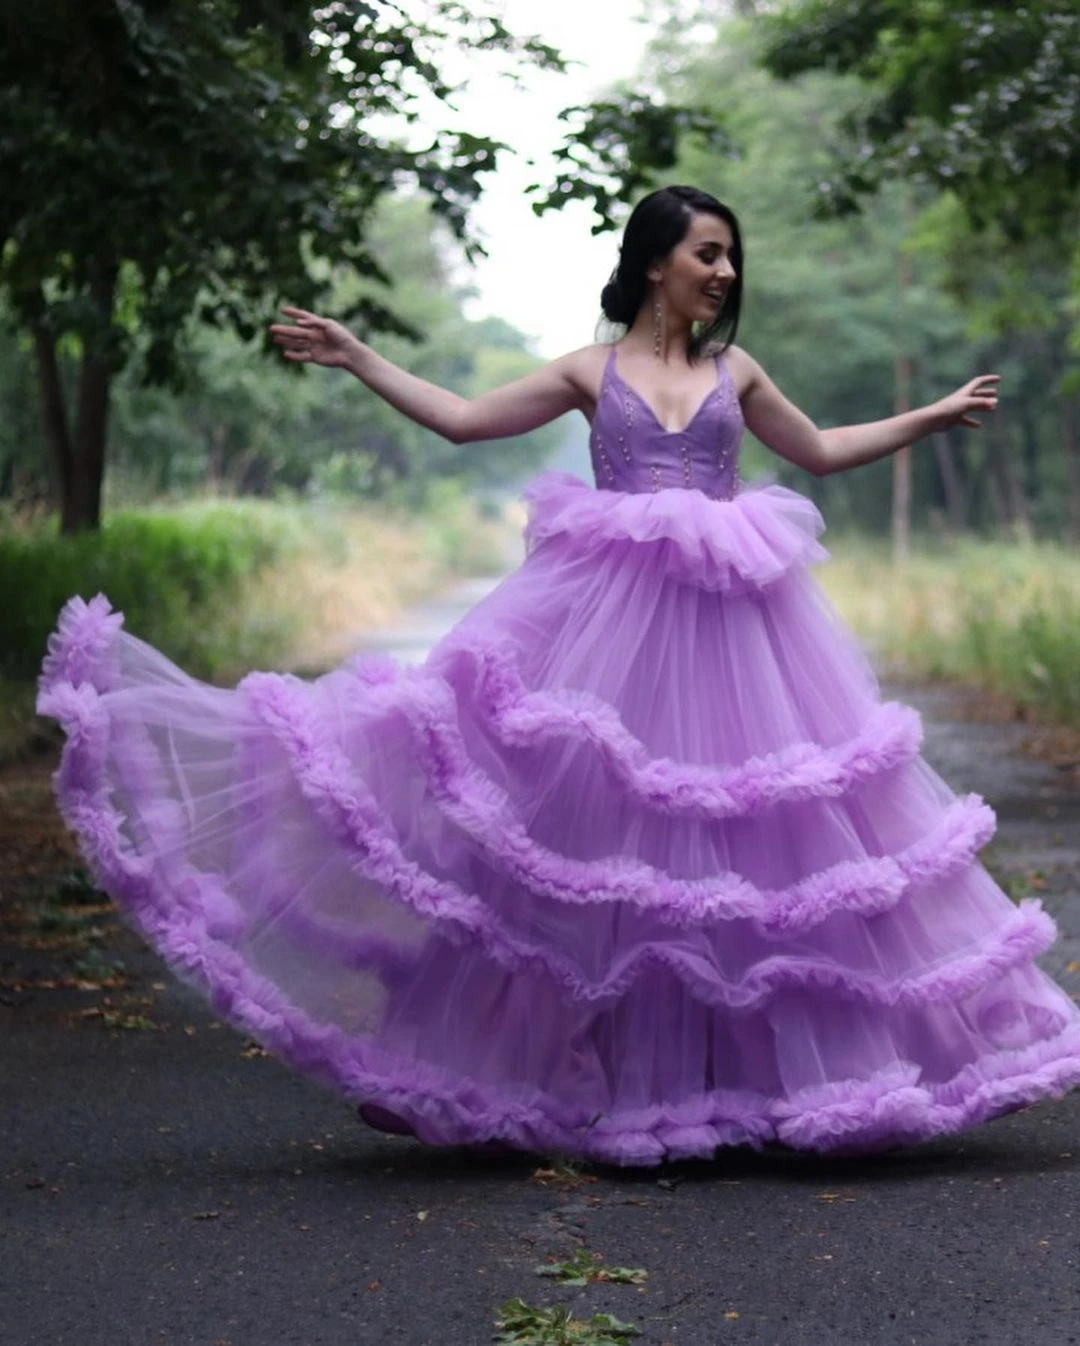 Purple V-Neck Tulle Dress Beaded Floor Length Prom Dress Layered Puffy Ball  Gown Dress Open Back Evening Dress For Photoshoot - AliExpress